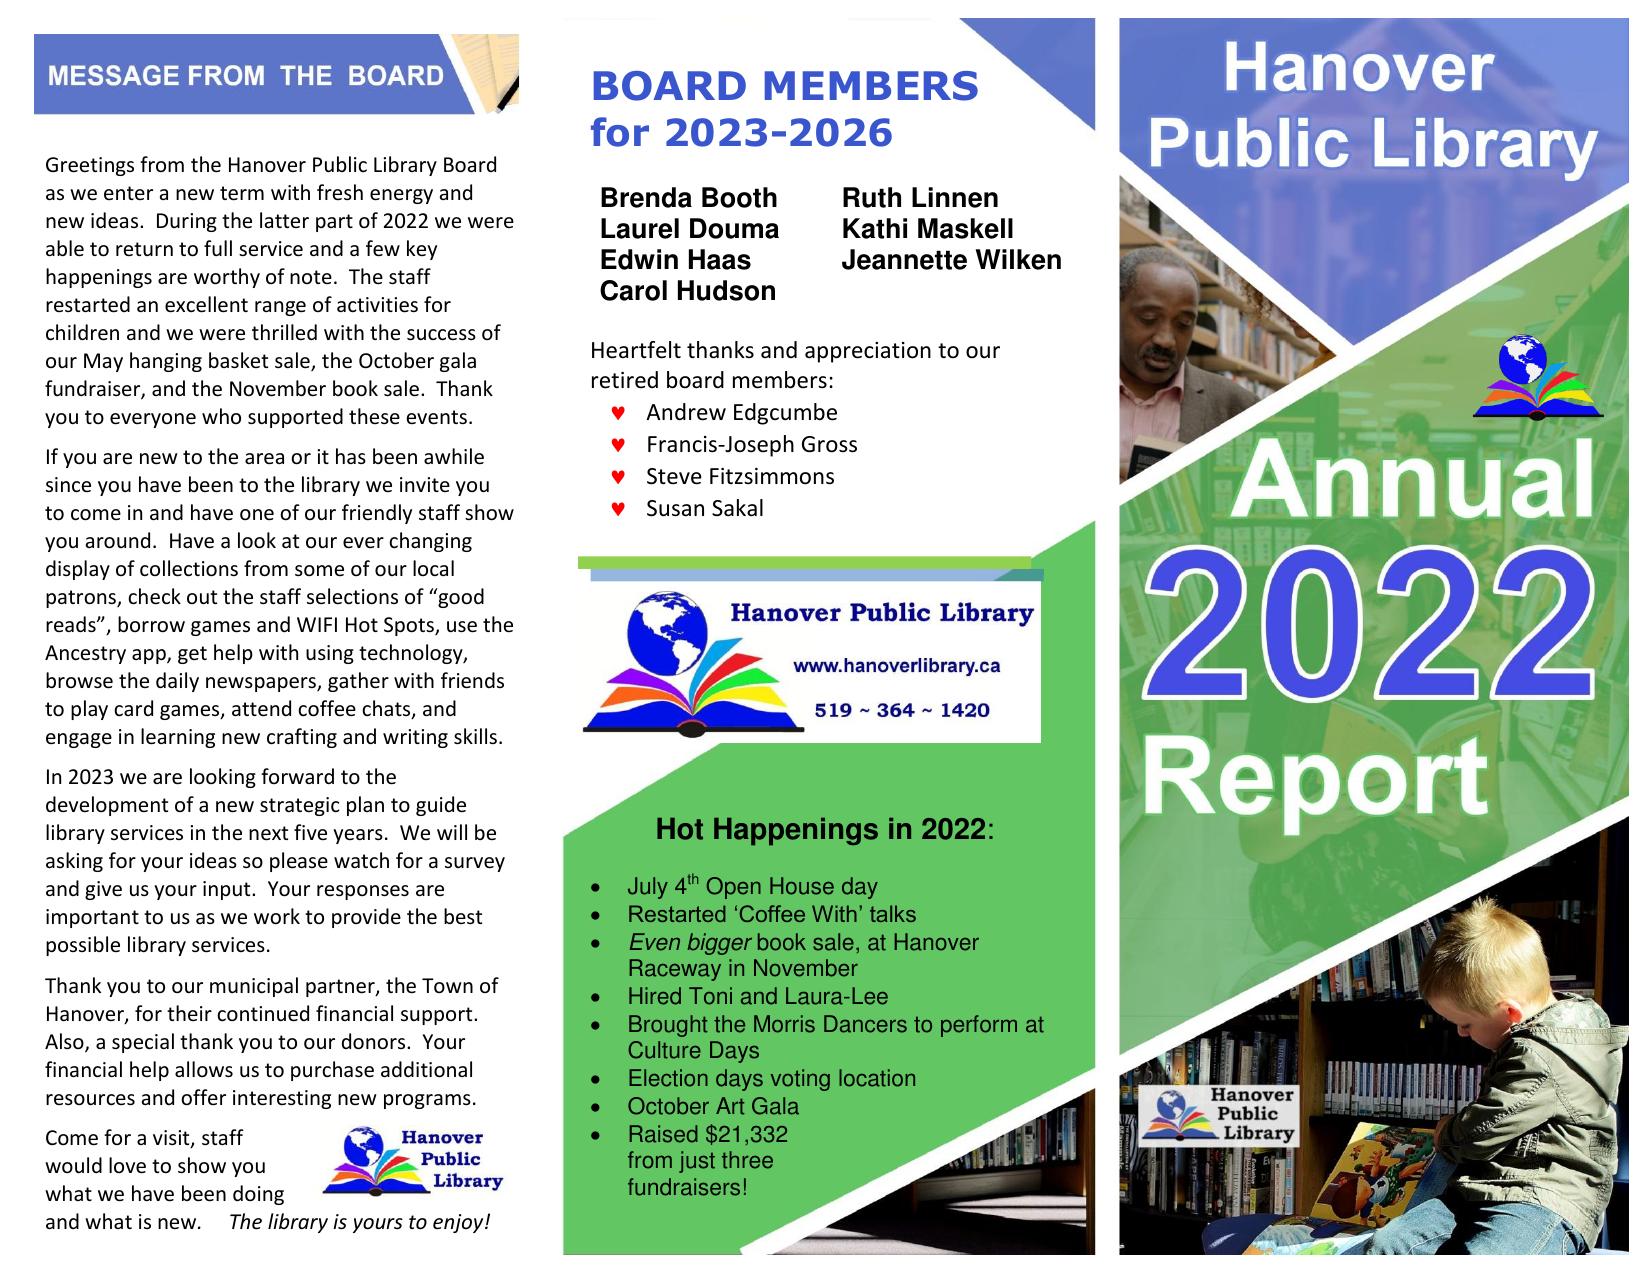 HANOVERLIBRARY 2022 Annual Report